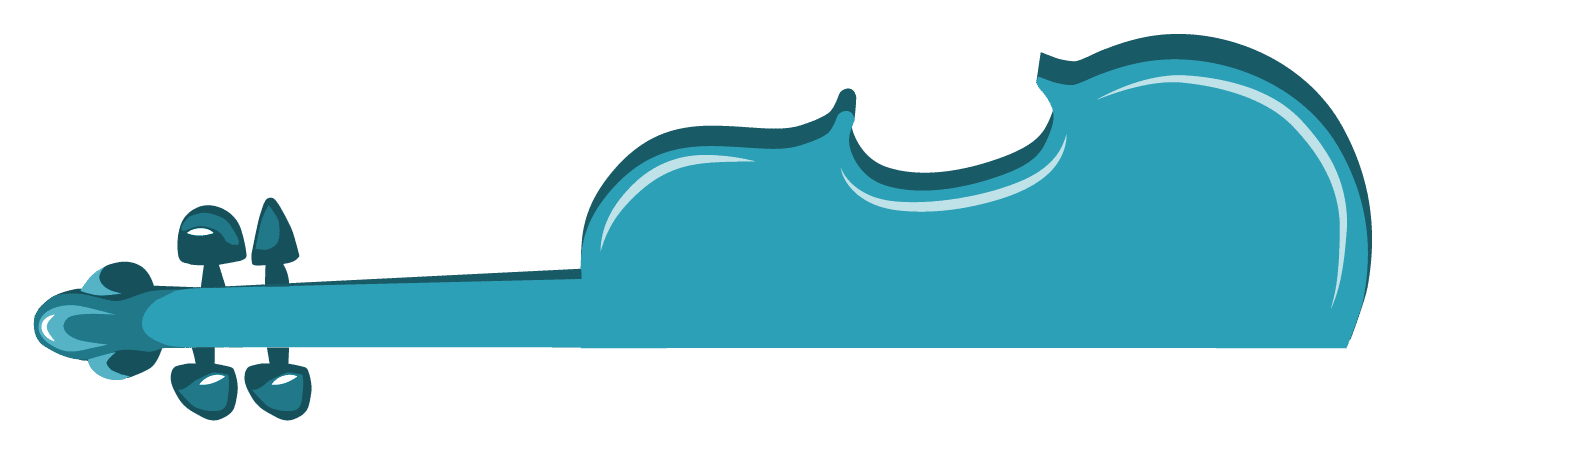 The String Connection